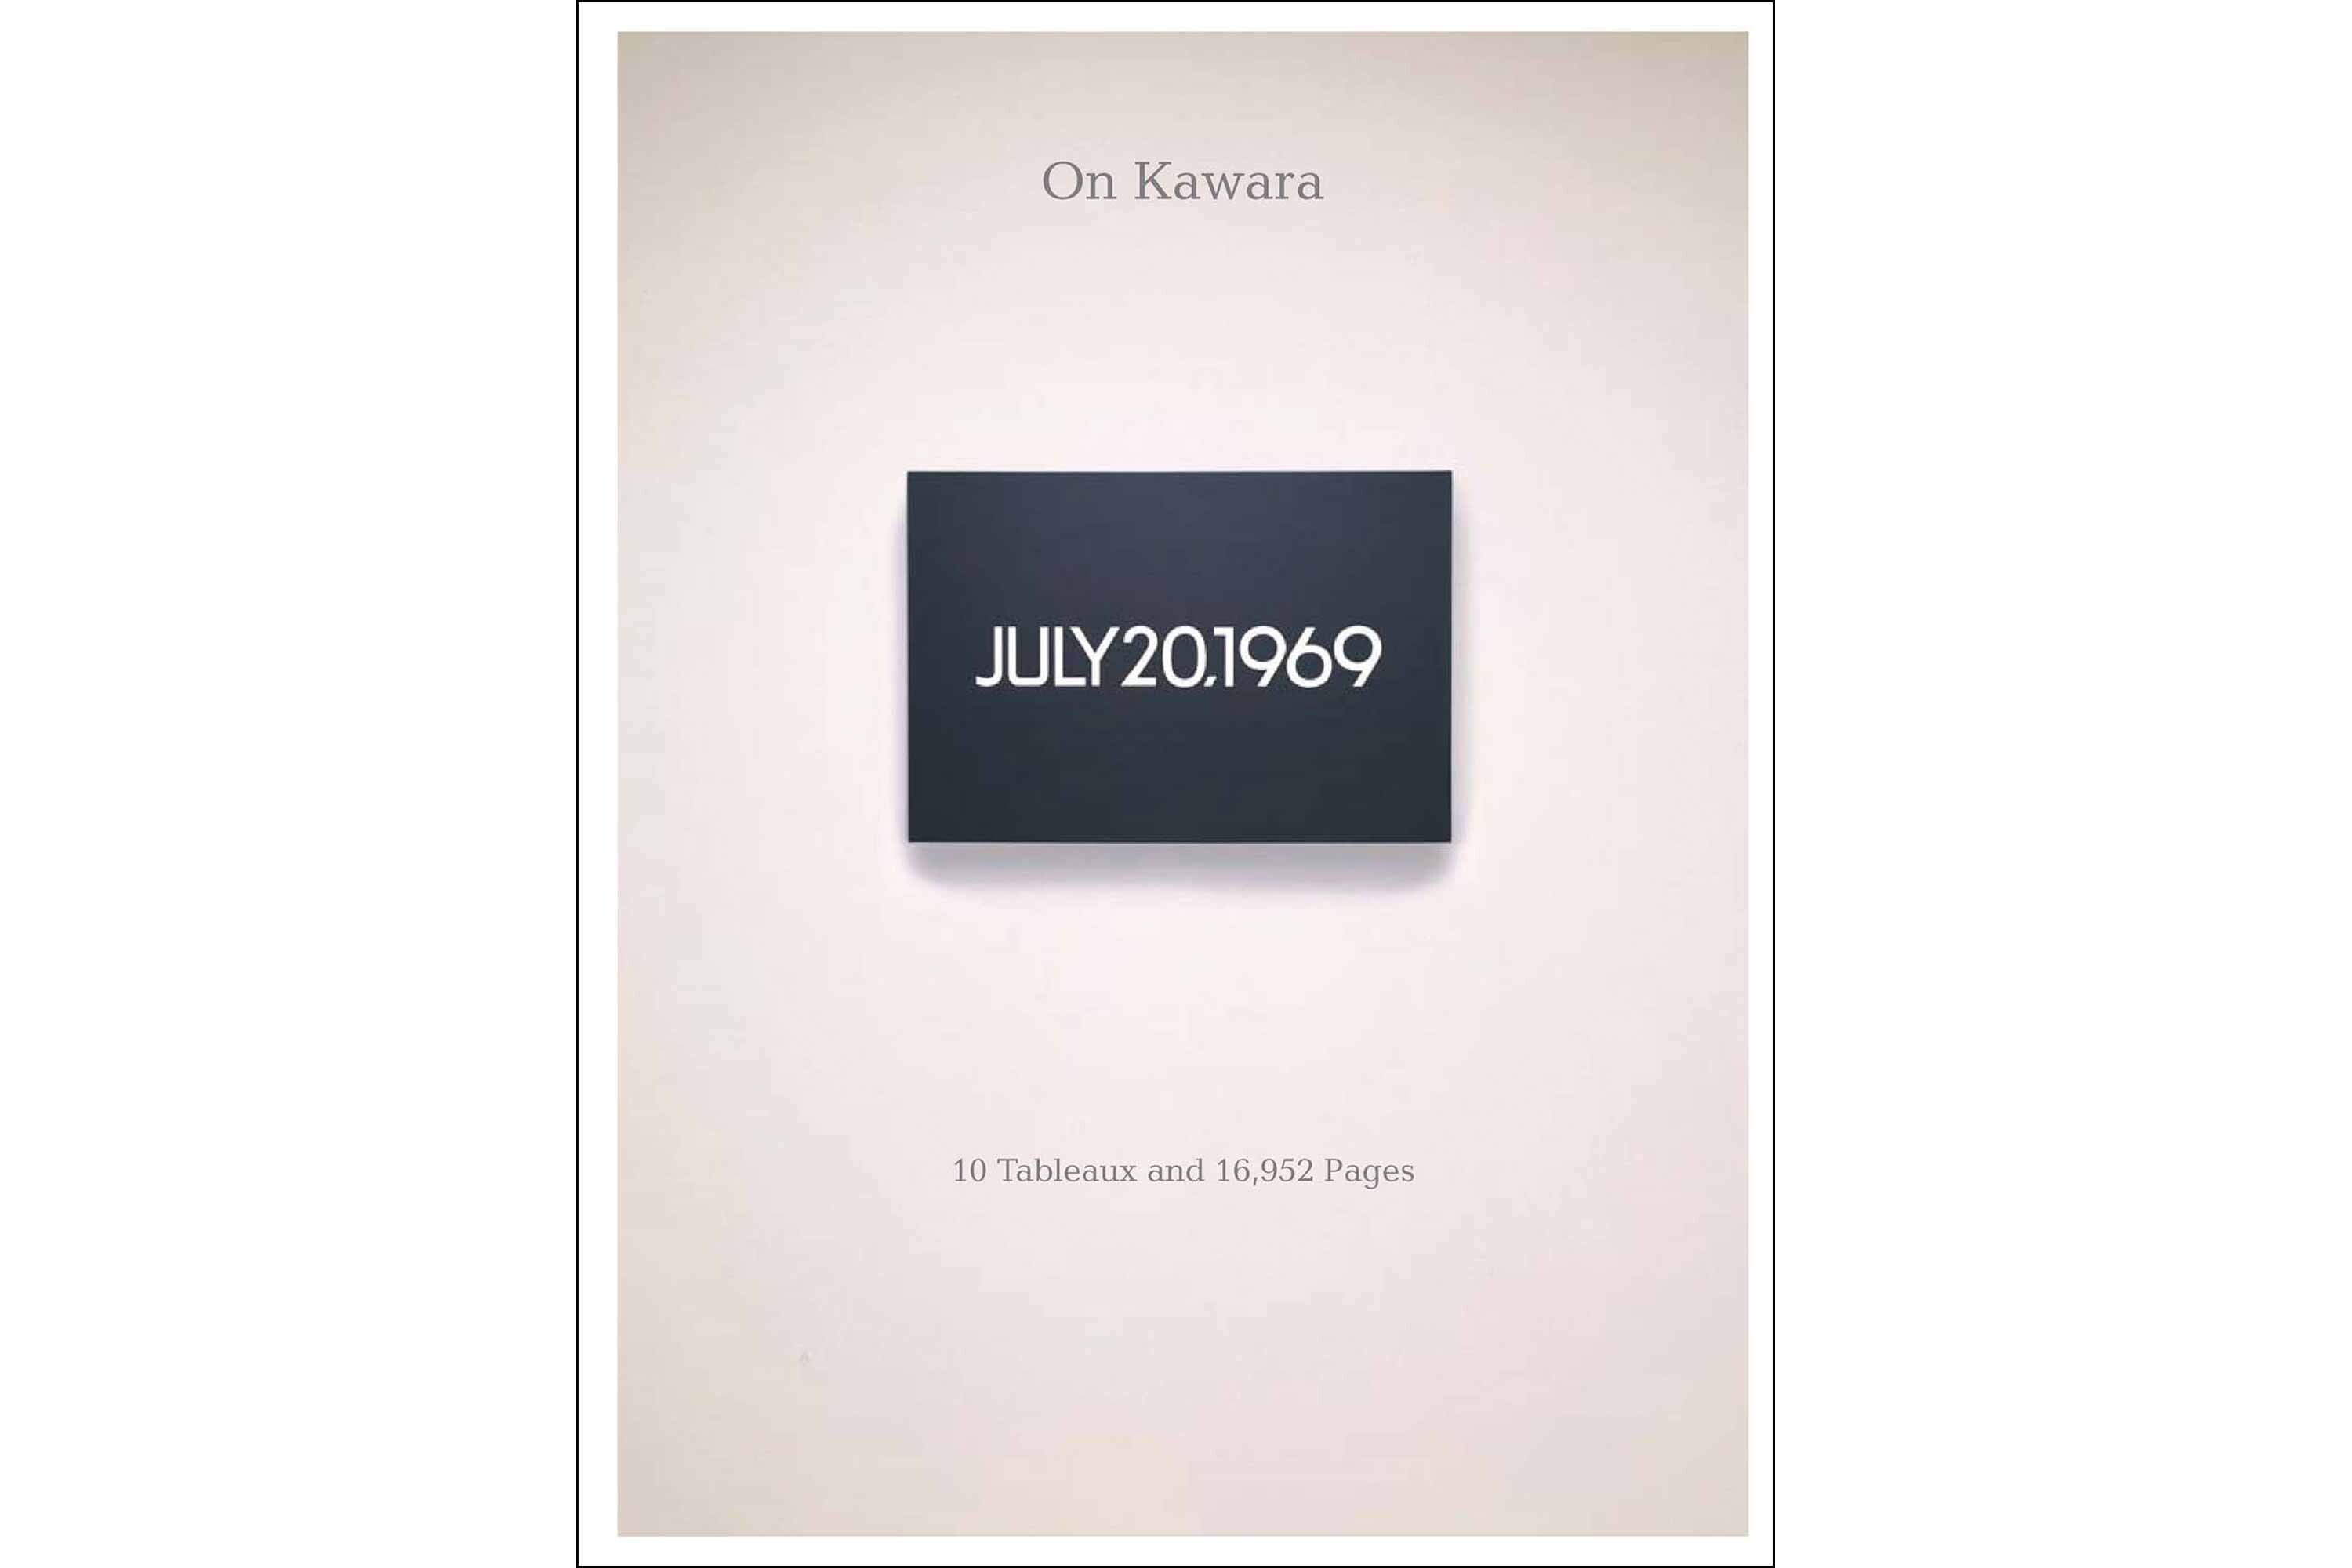 On Kawara: 10 Tableaux and 16,952 Pages | David Zwirner Books